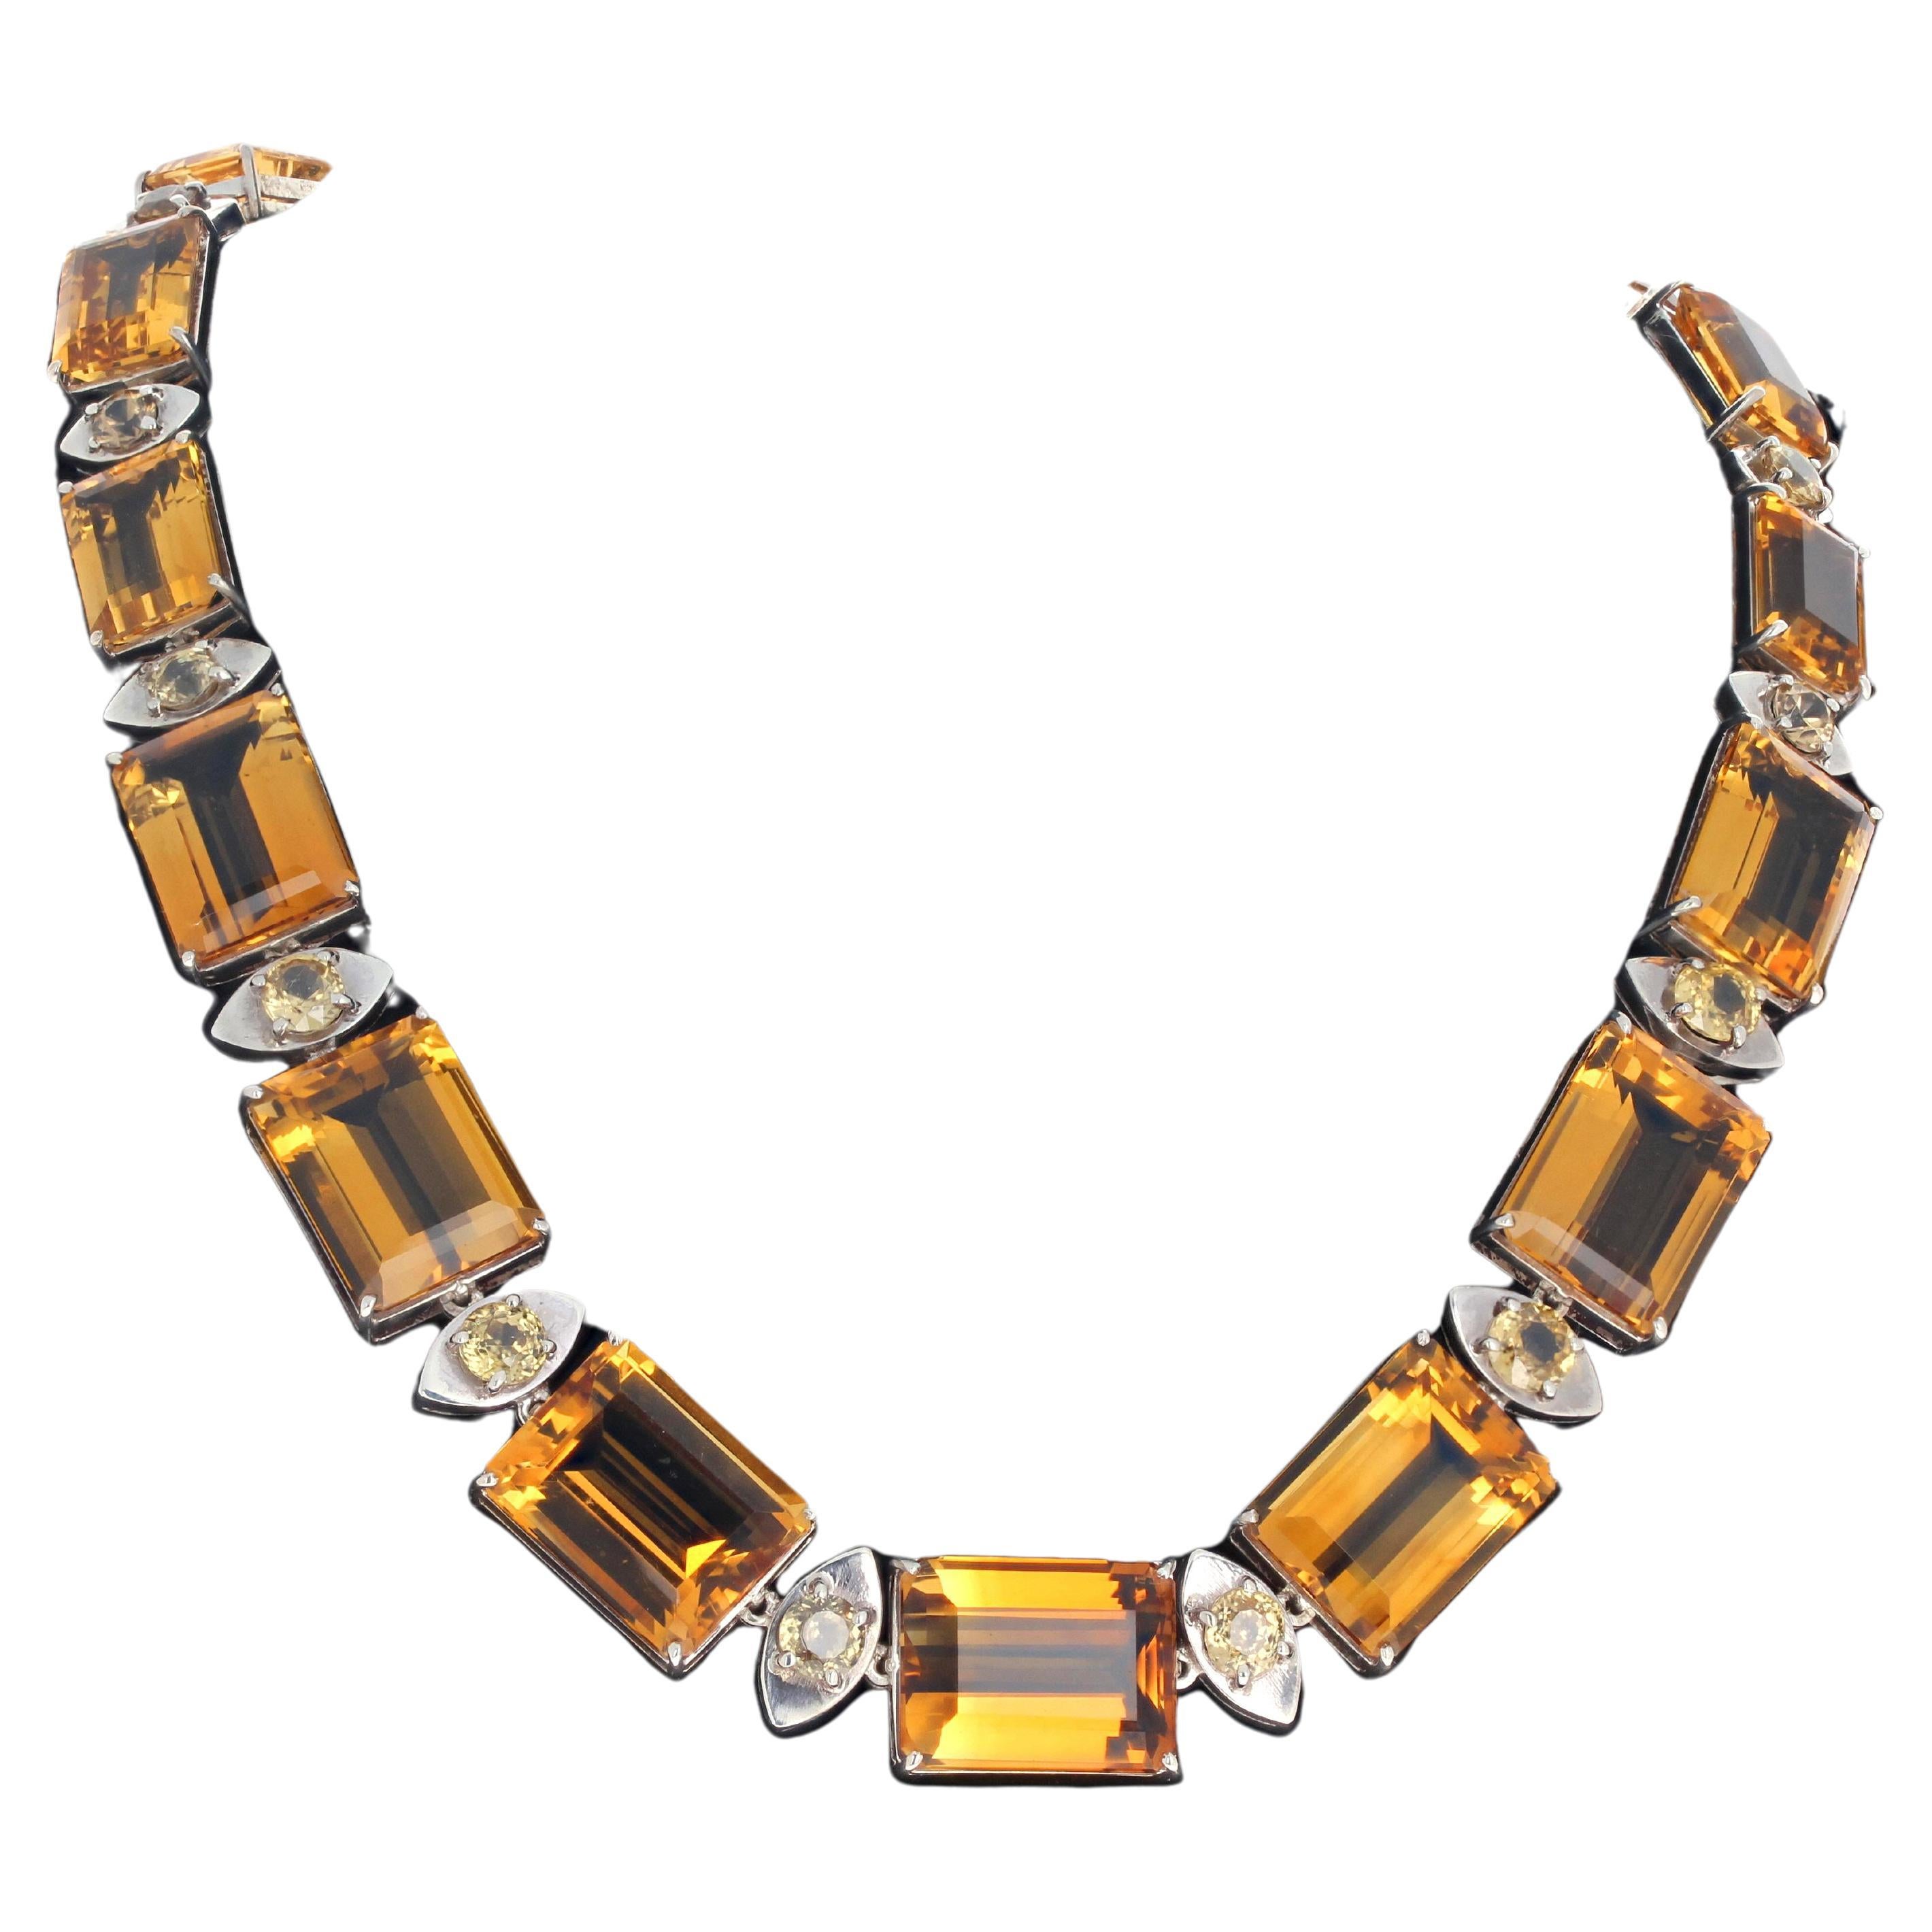 This amazing real Citrines necklace is 18 1/2 inches long with an easy to us sterling silver slide-in clasp.  The largest gemstone is 21mm x 16/2mm.  The largest gemstone is approximately 22.86 carats.  This sits magnificently and comfortably around